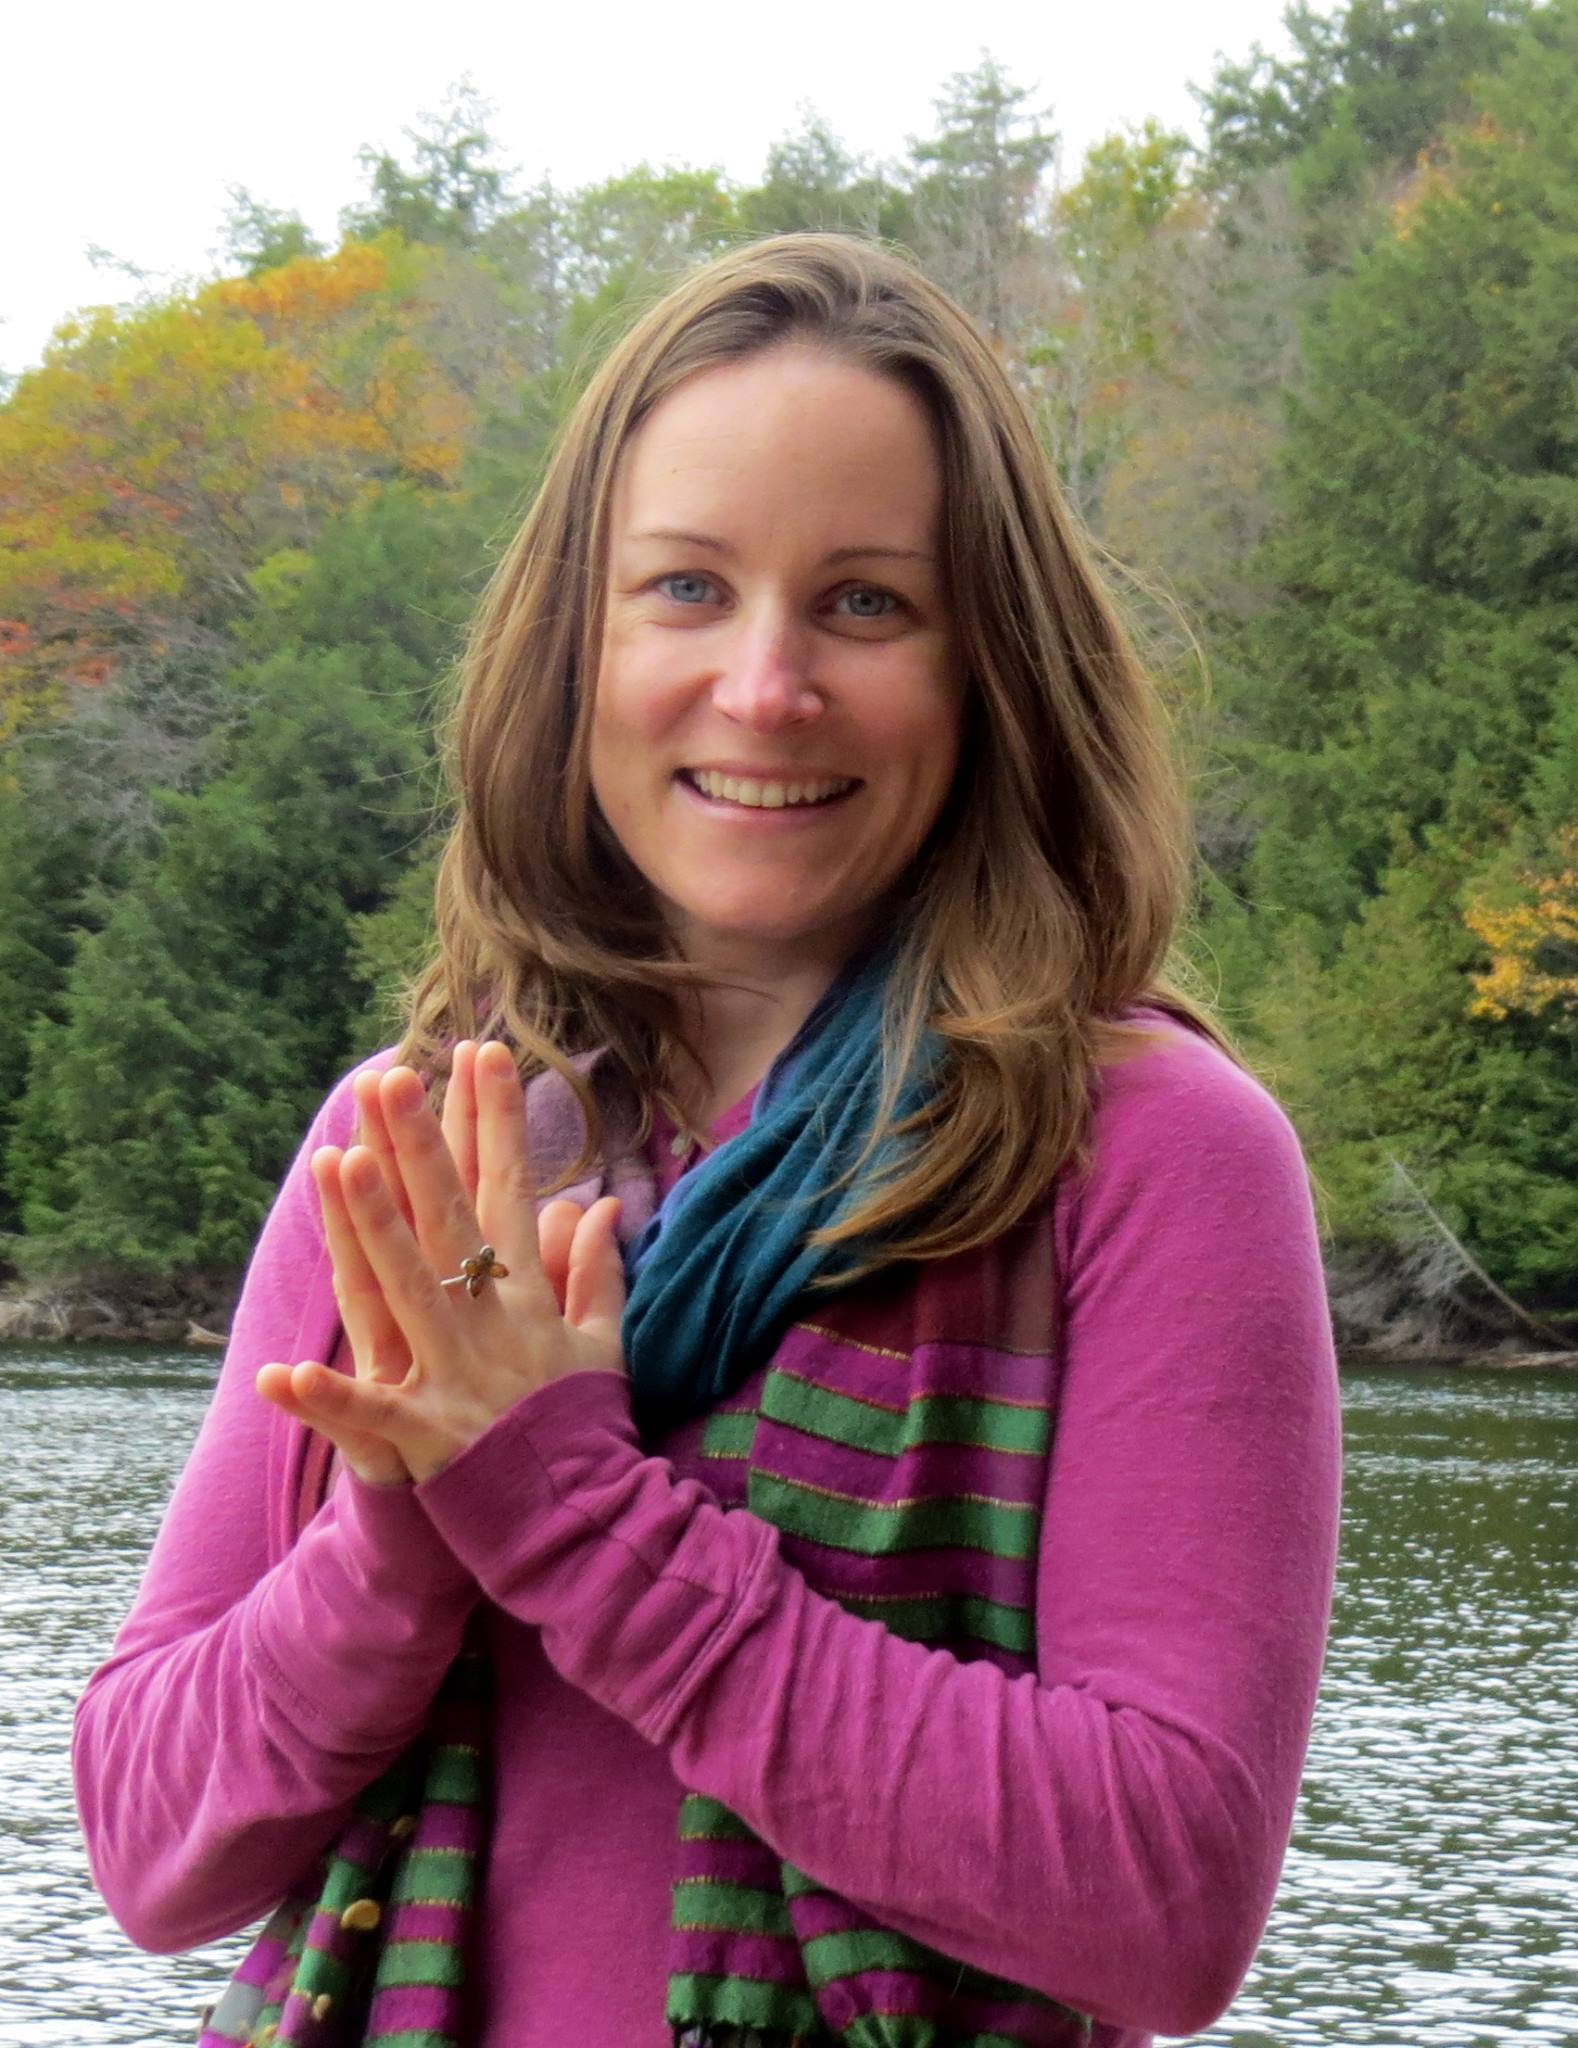 Shannon Crow, a white woman with brown hair, holds her hands in prayer position. She is wearing a purple blouse and a blue scarf, and is standing outdoors in front of a river and forest.